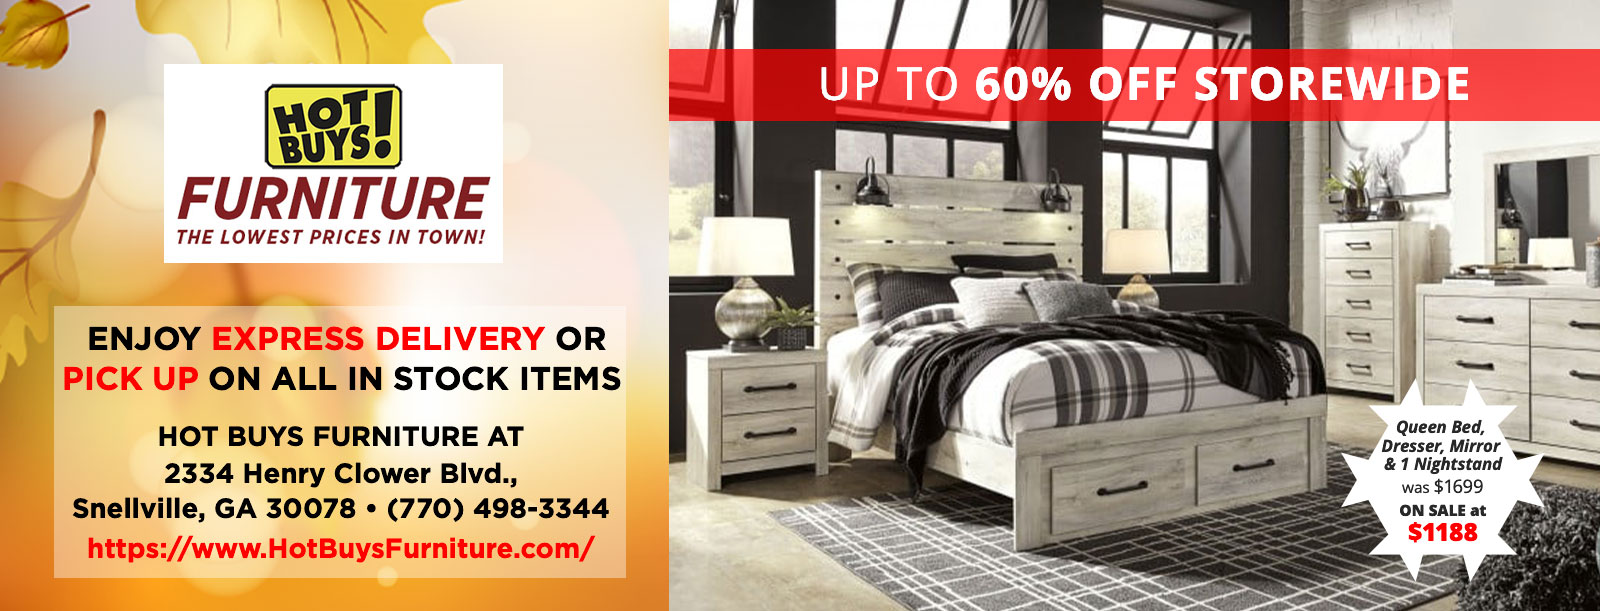 enjoy express delivery orpick up on all in stock items 